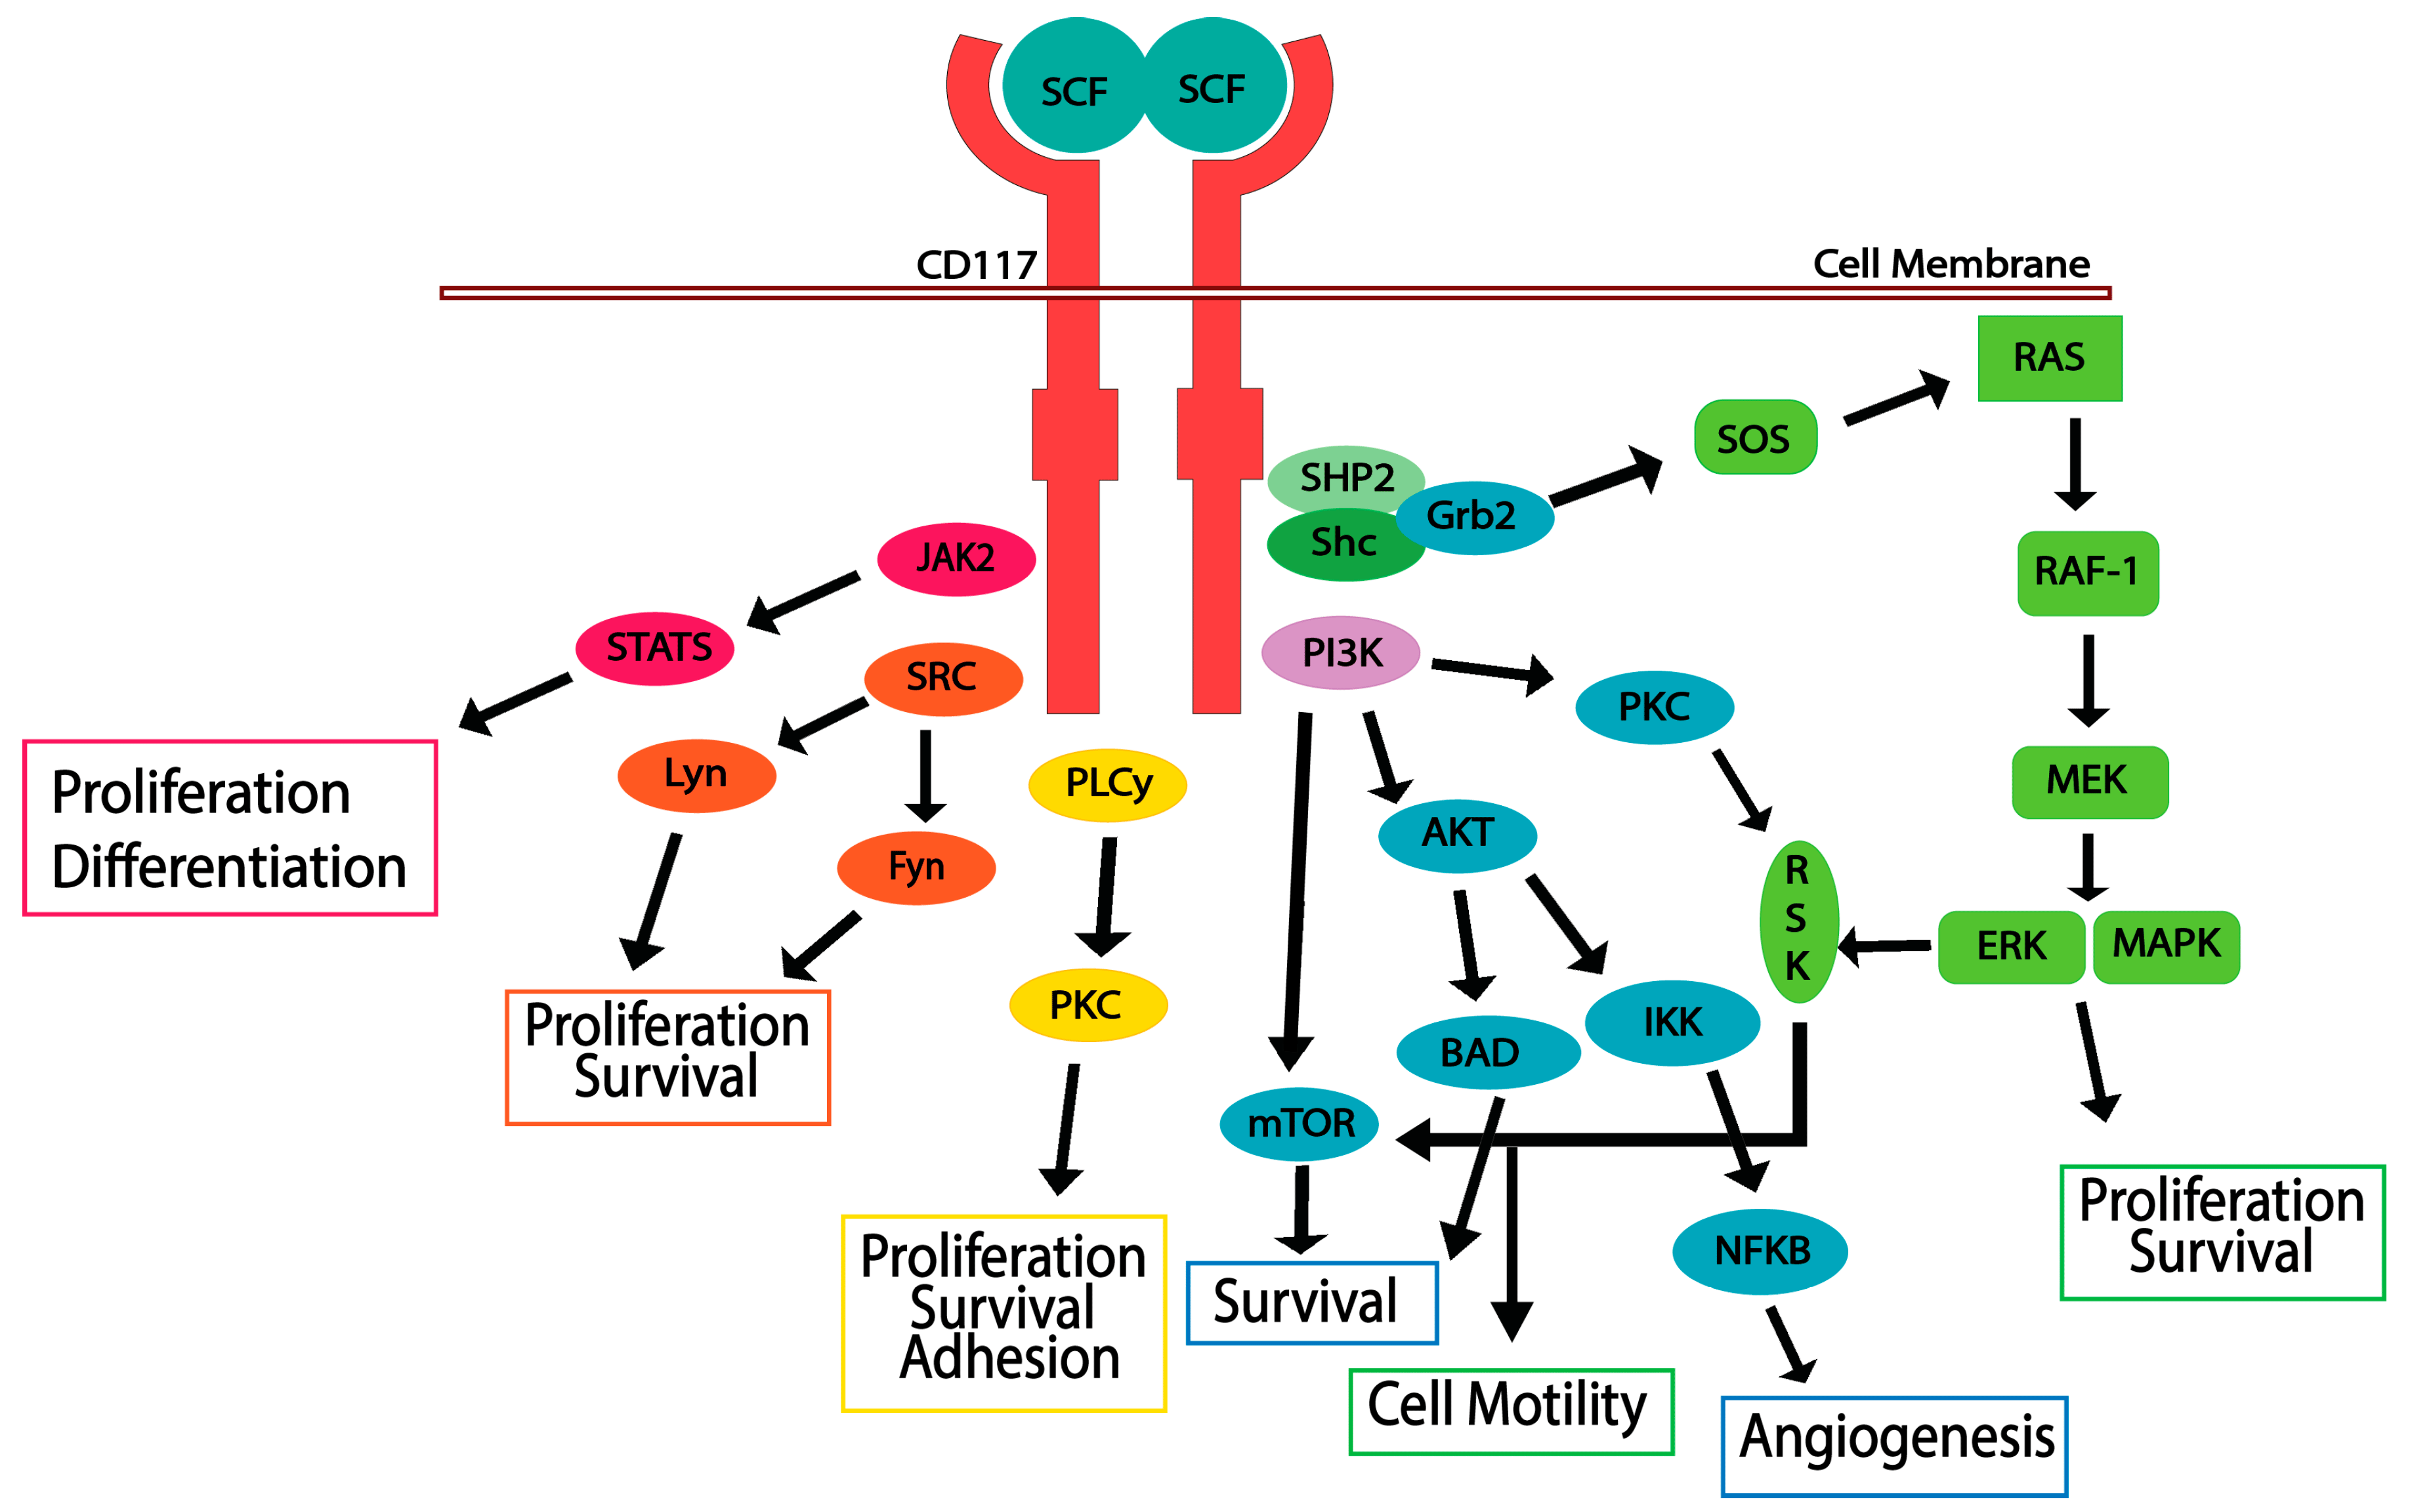 Fig.1 Signaling pathways involved in CD117. (Foster, et al., 2018)